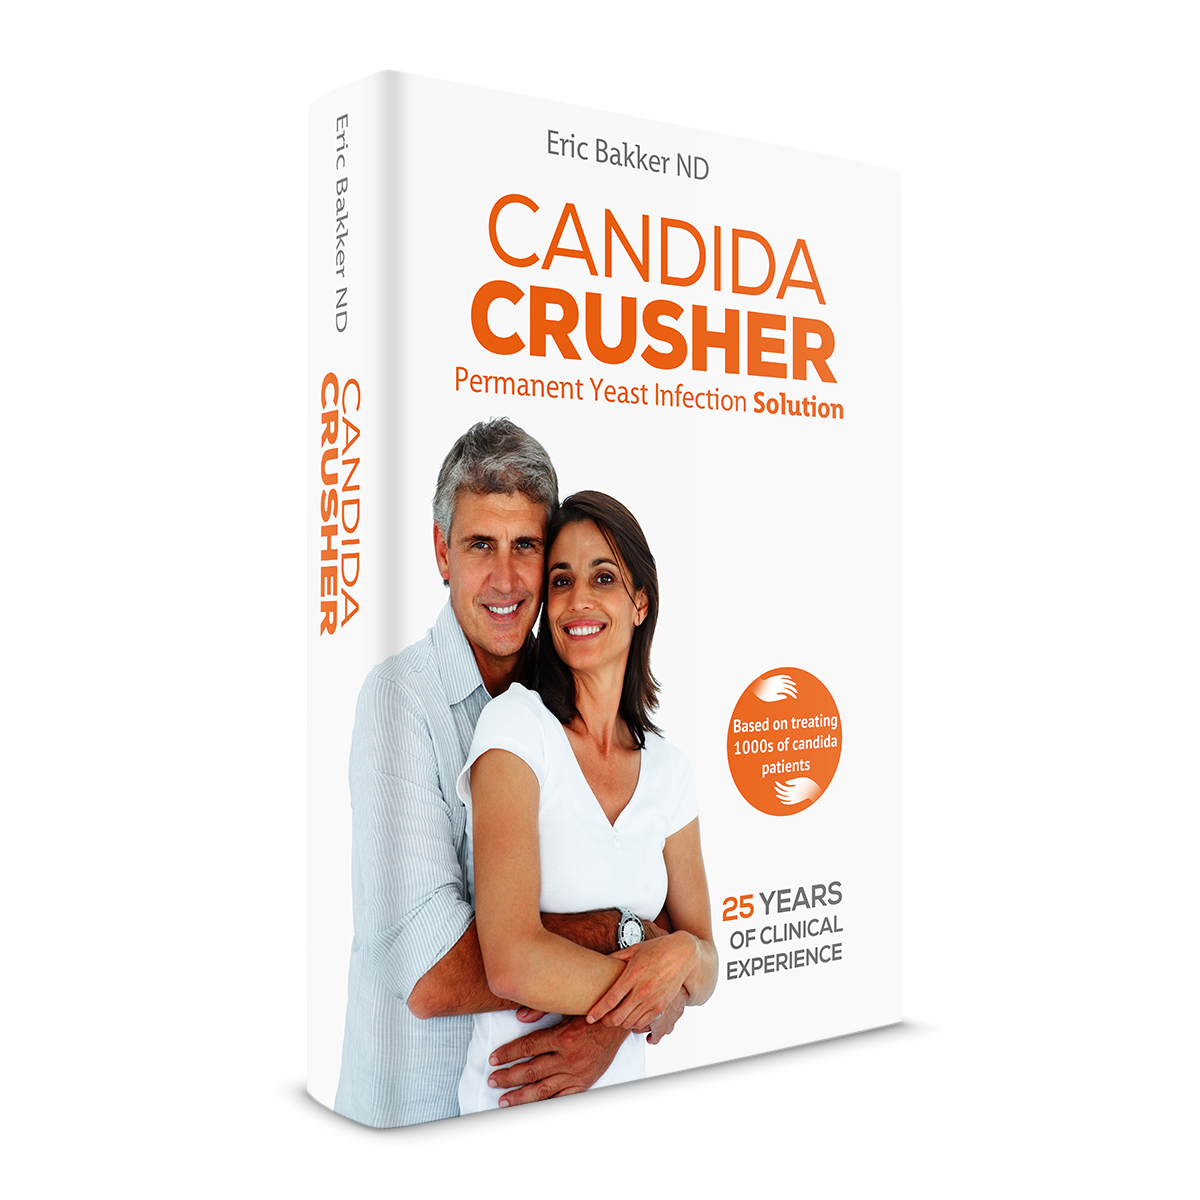 Candida crusher pdf free download online youtube download mp4